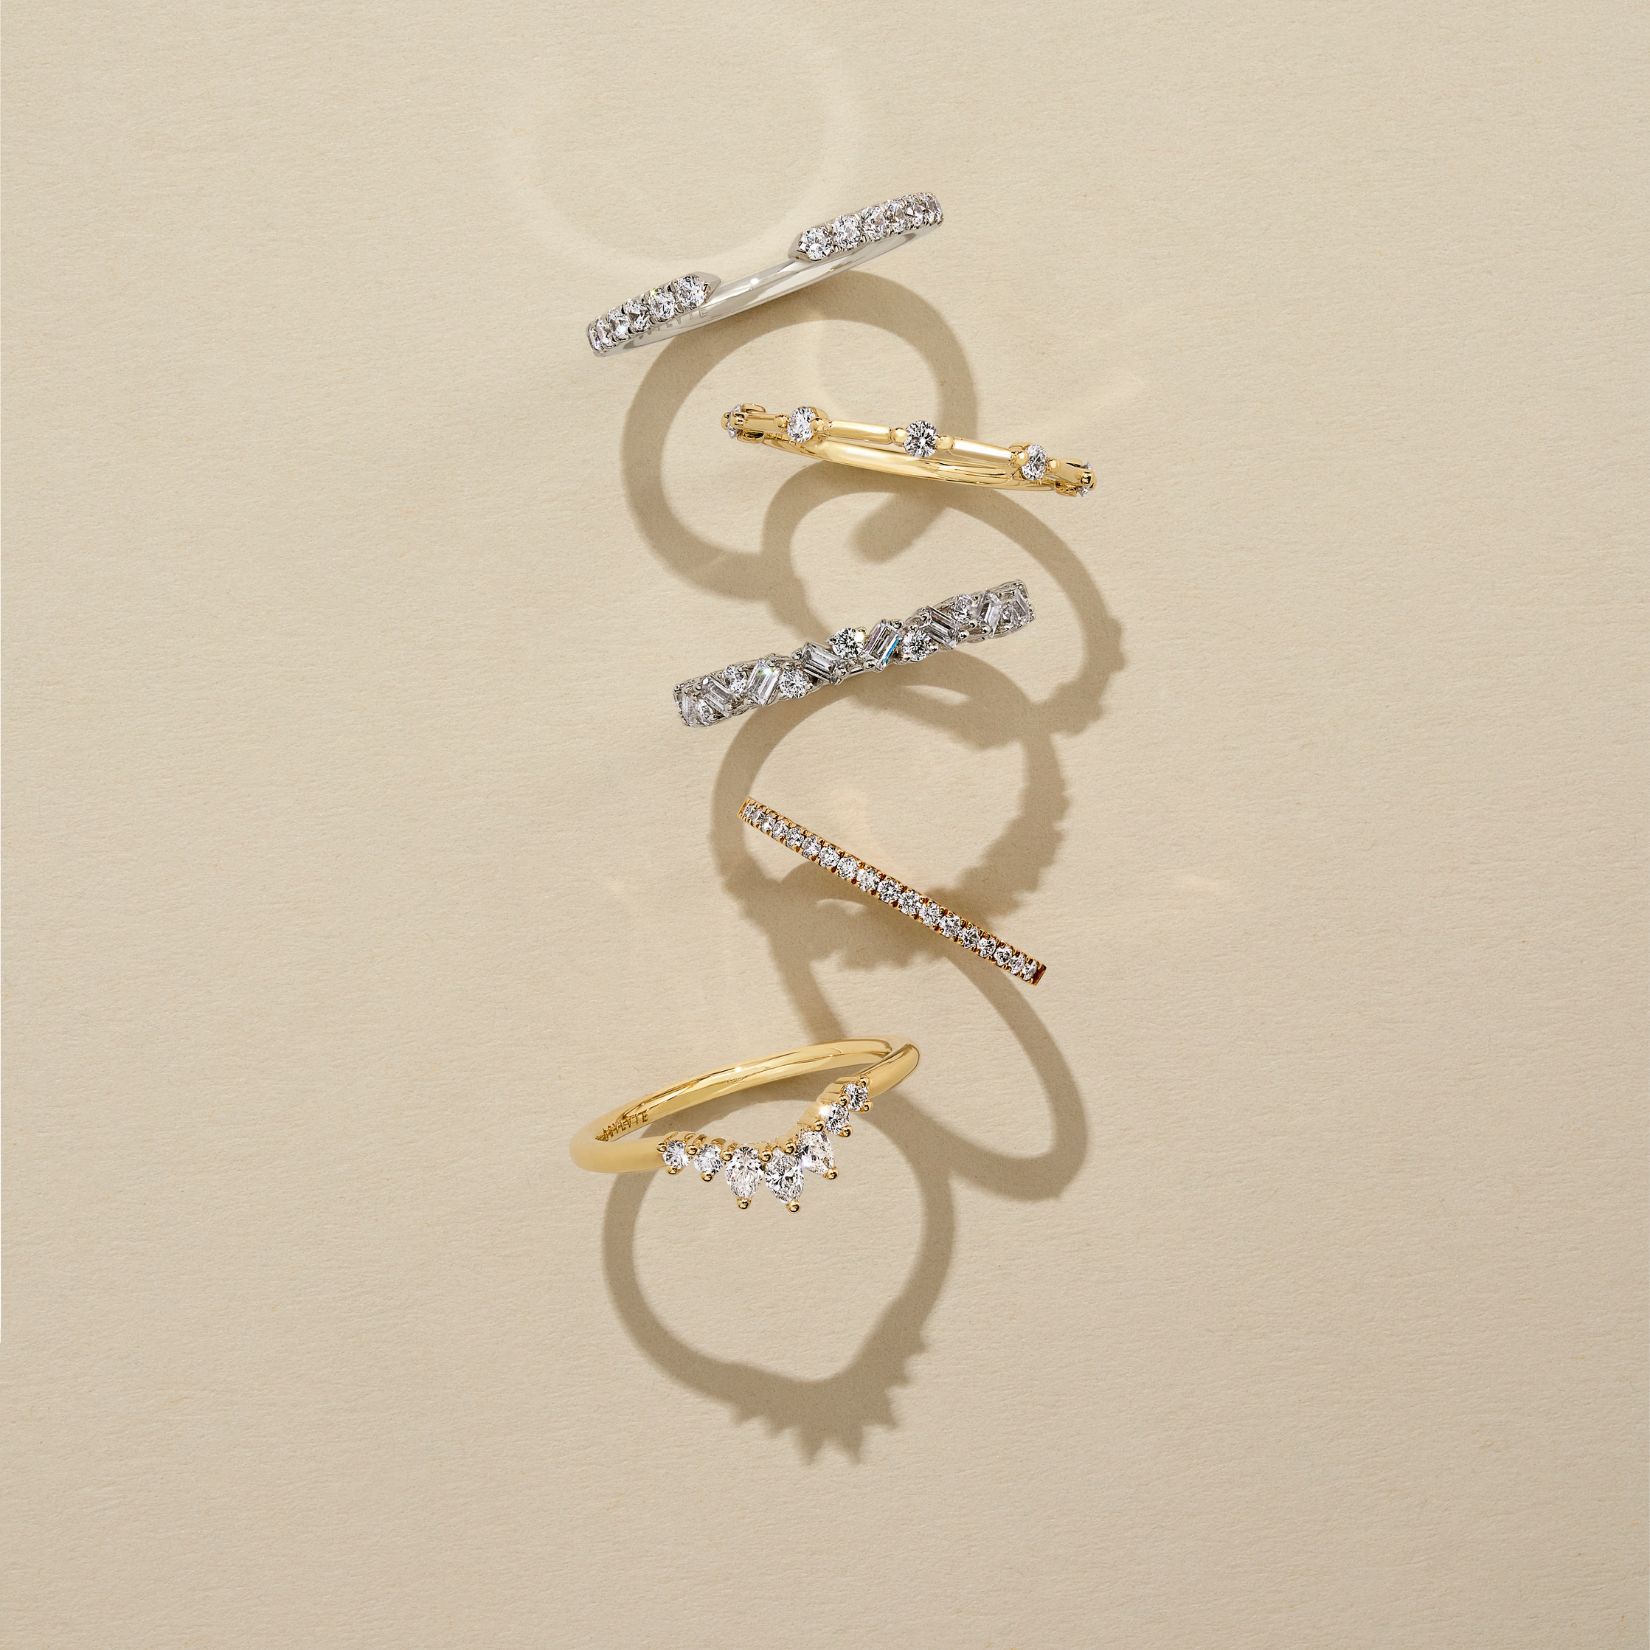 different types of wedding rings on a beige background